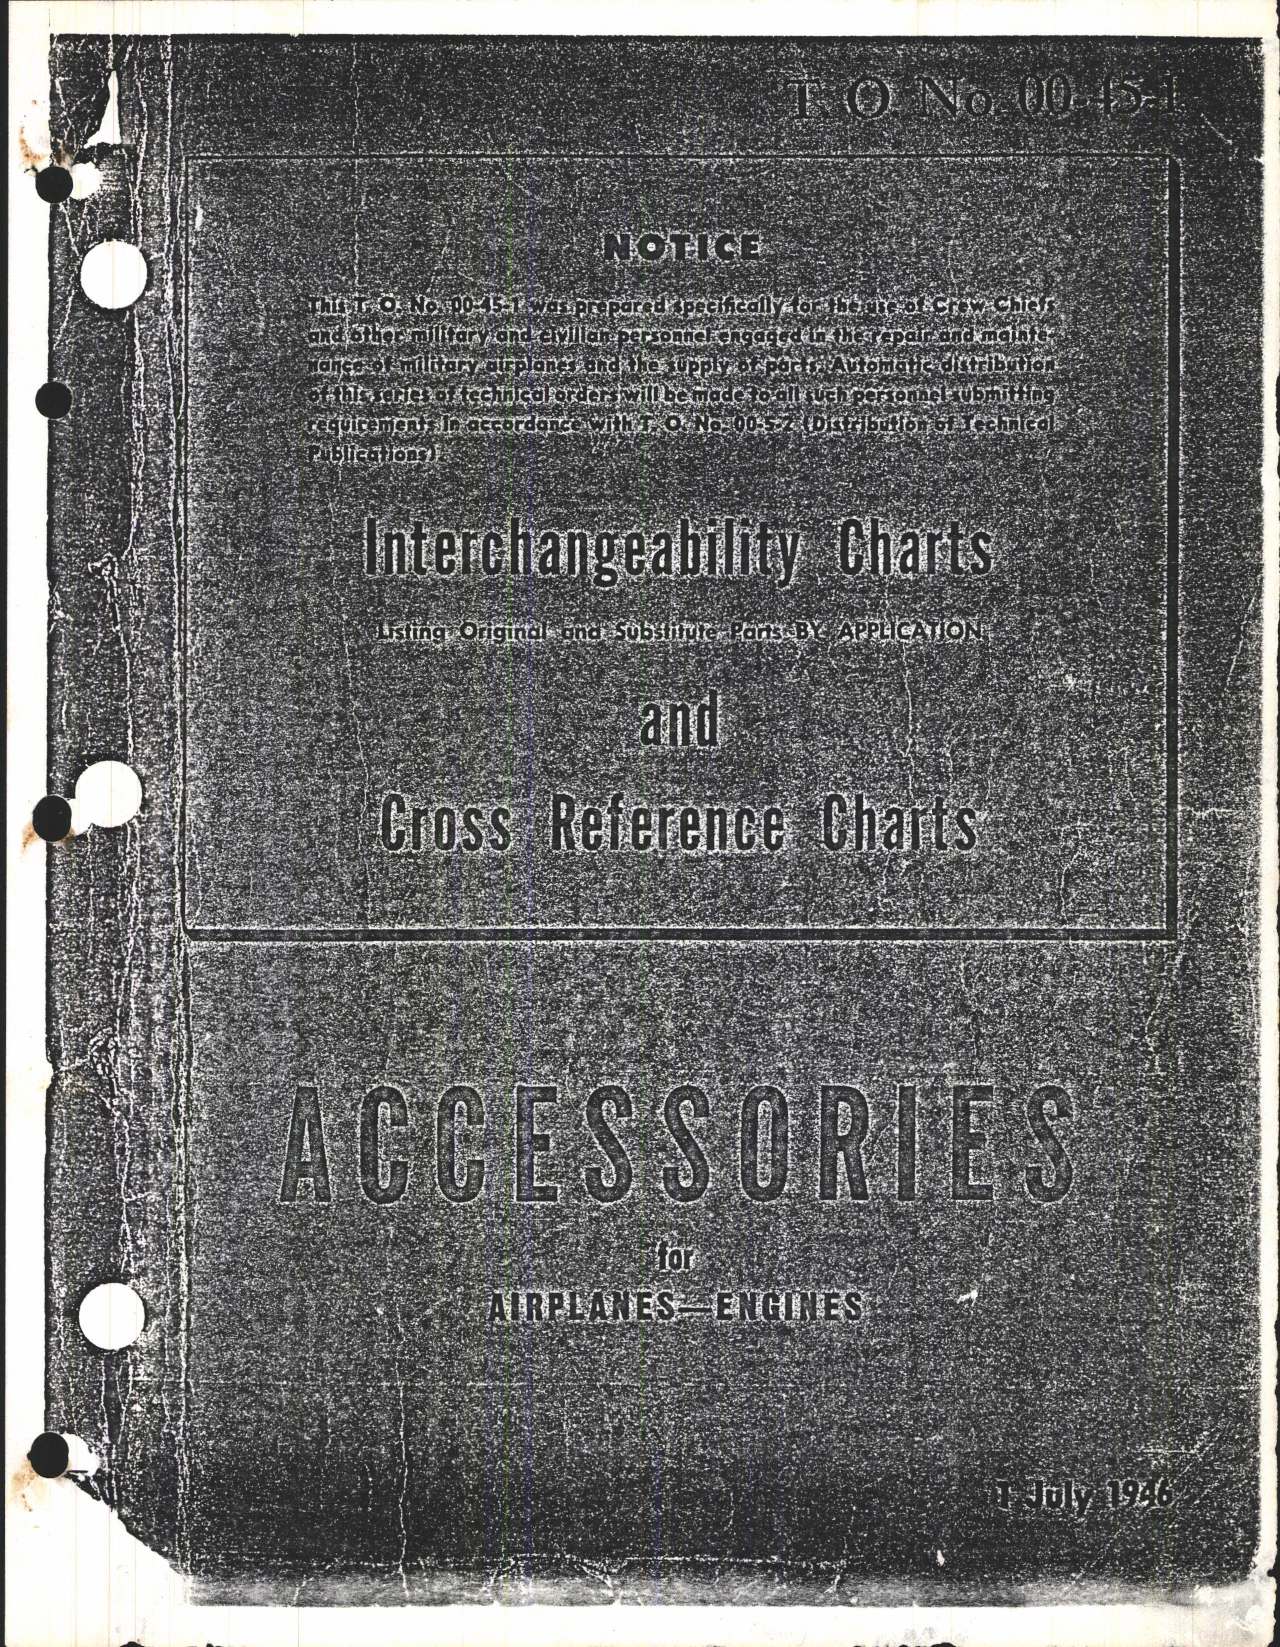 Sample page 1 from AirCorps Library document: Airplane Engine Accessories; Interchangeability Charts and Cross Reference Charts